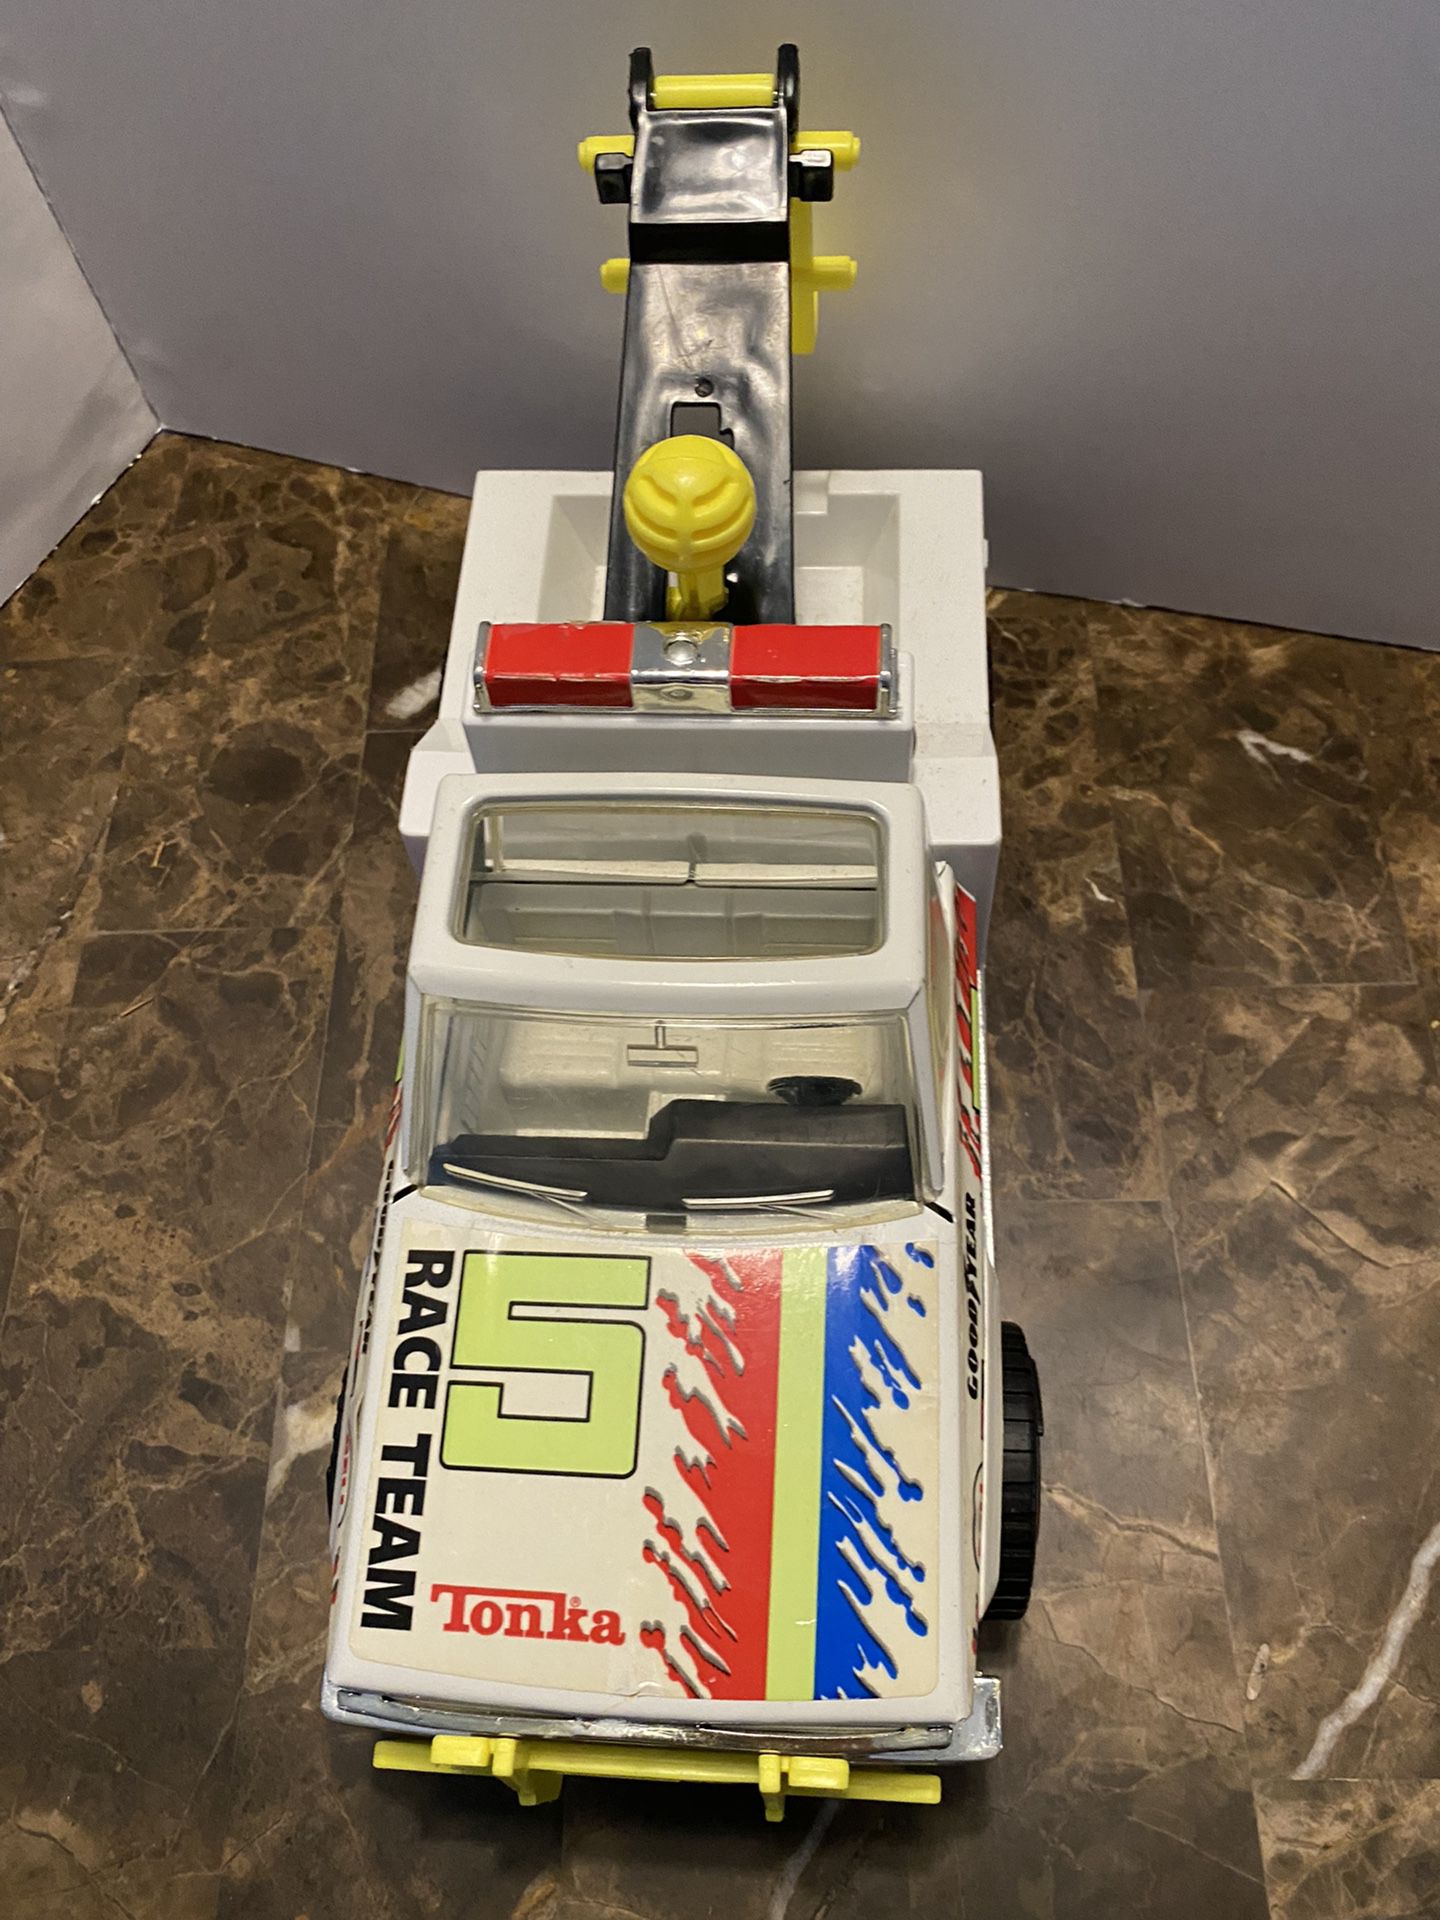 Vintage 1983 Large Tonka tow truck wrecker great condition colors Race Team 5. Measures 14” long.  